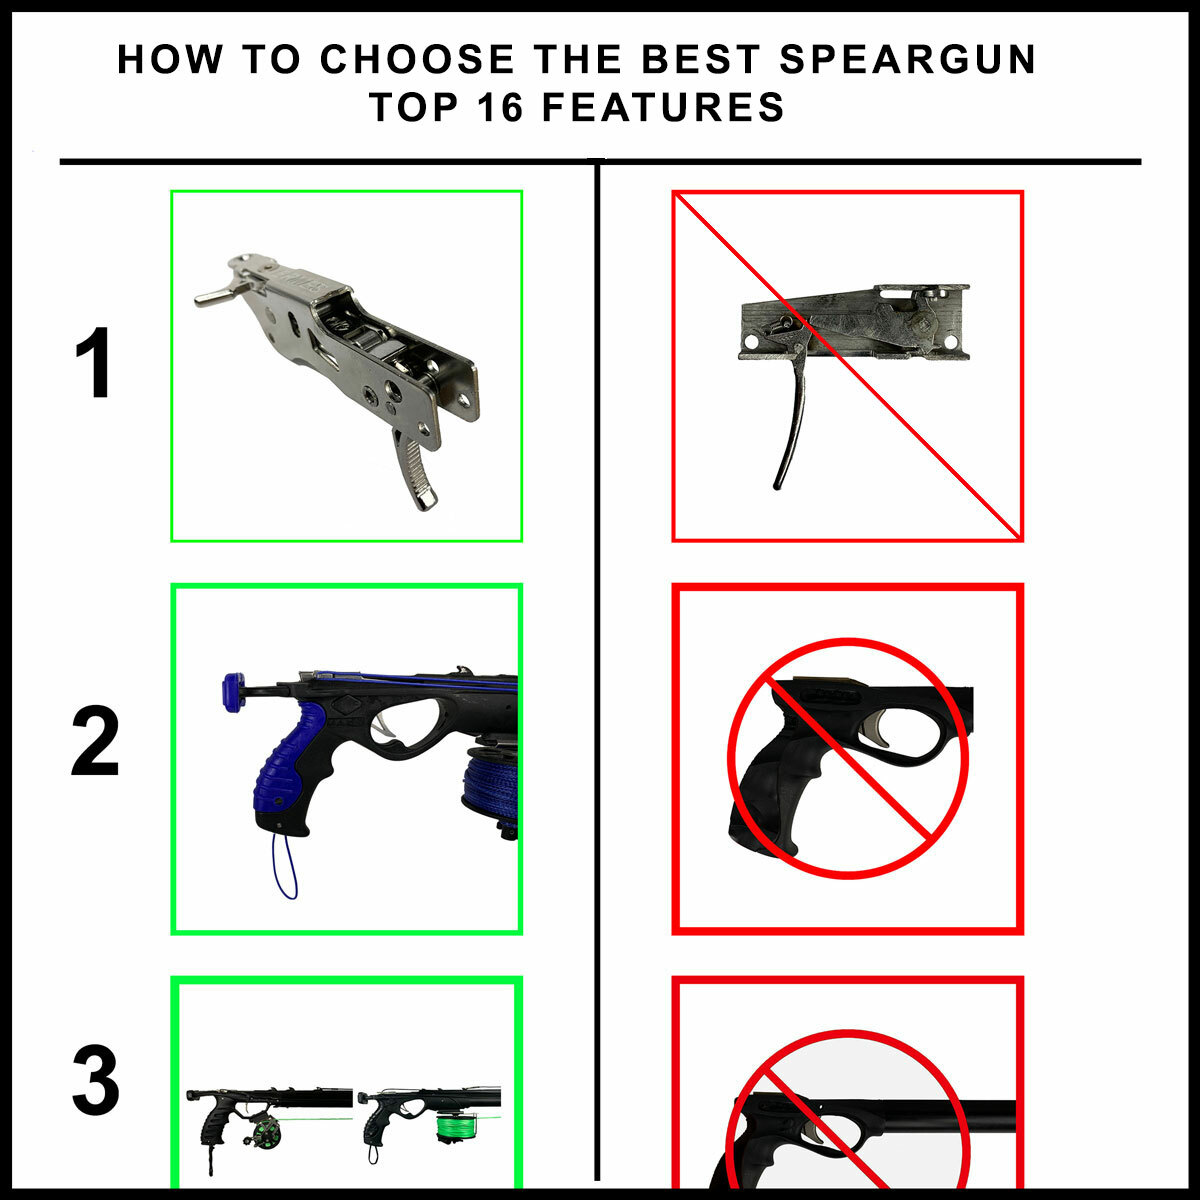 How to choose the best Speargun